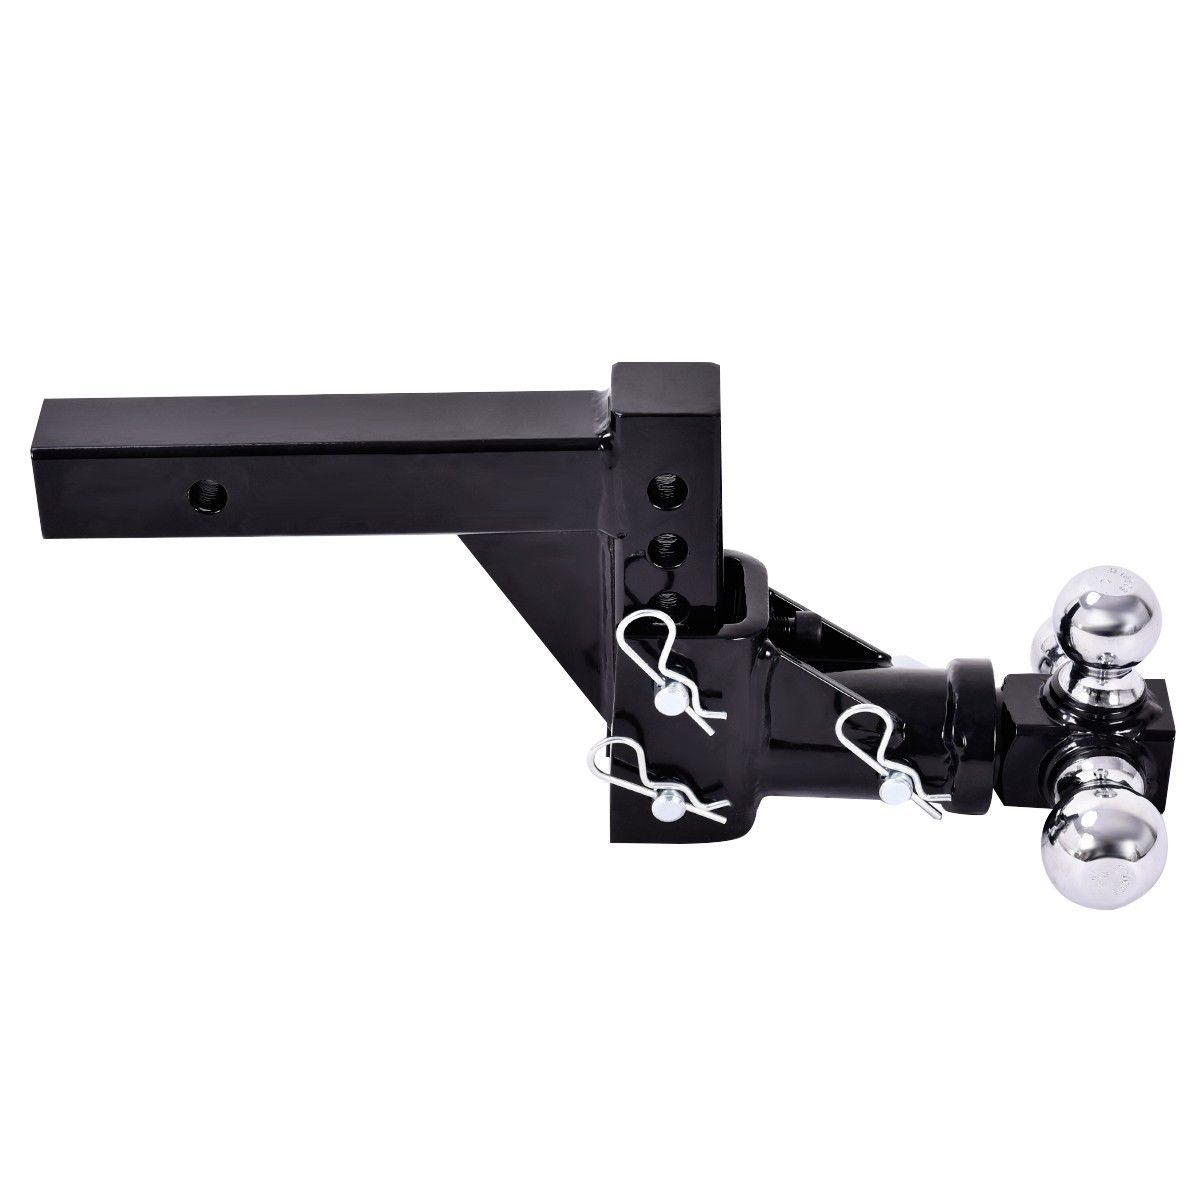 Triple Ball Swivel Adjustable Drop Turn Trailer Tow Hitch Mount For 2'' Receiver